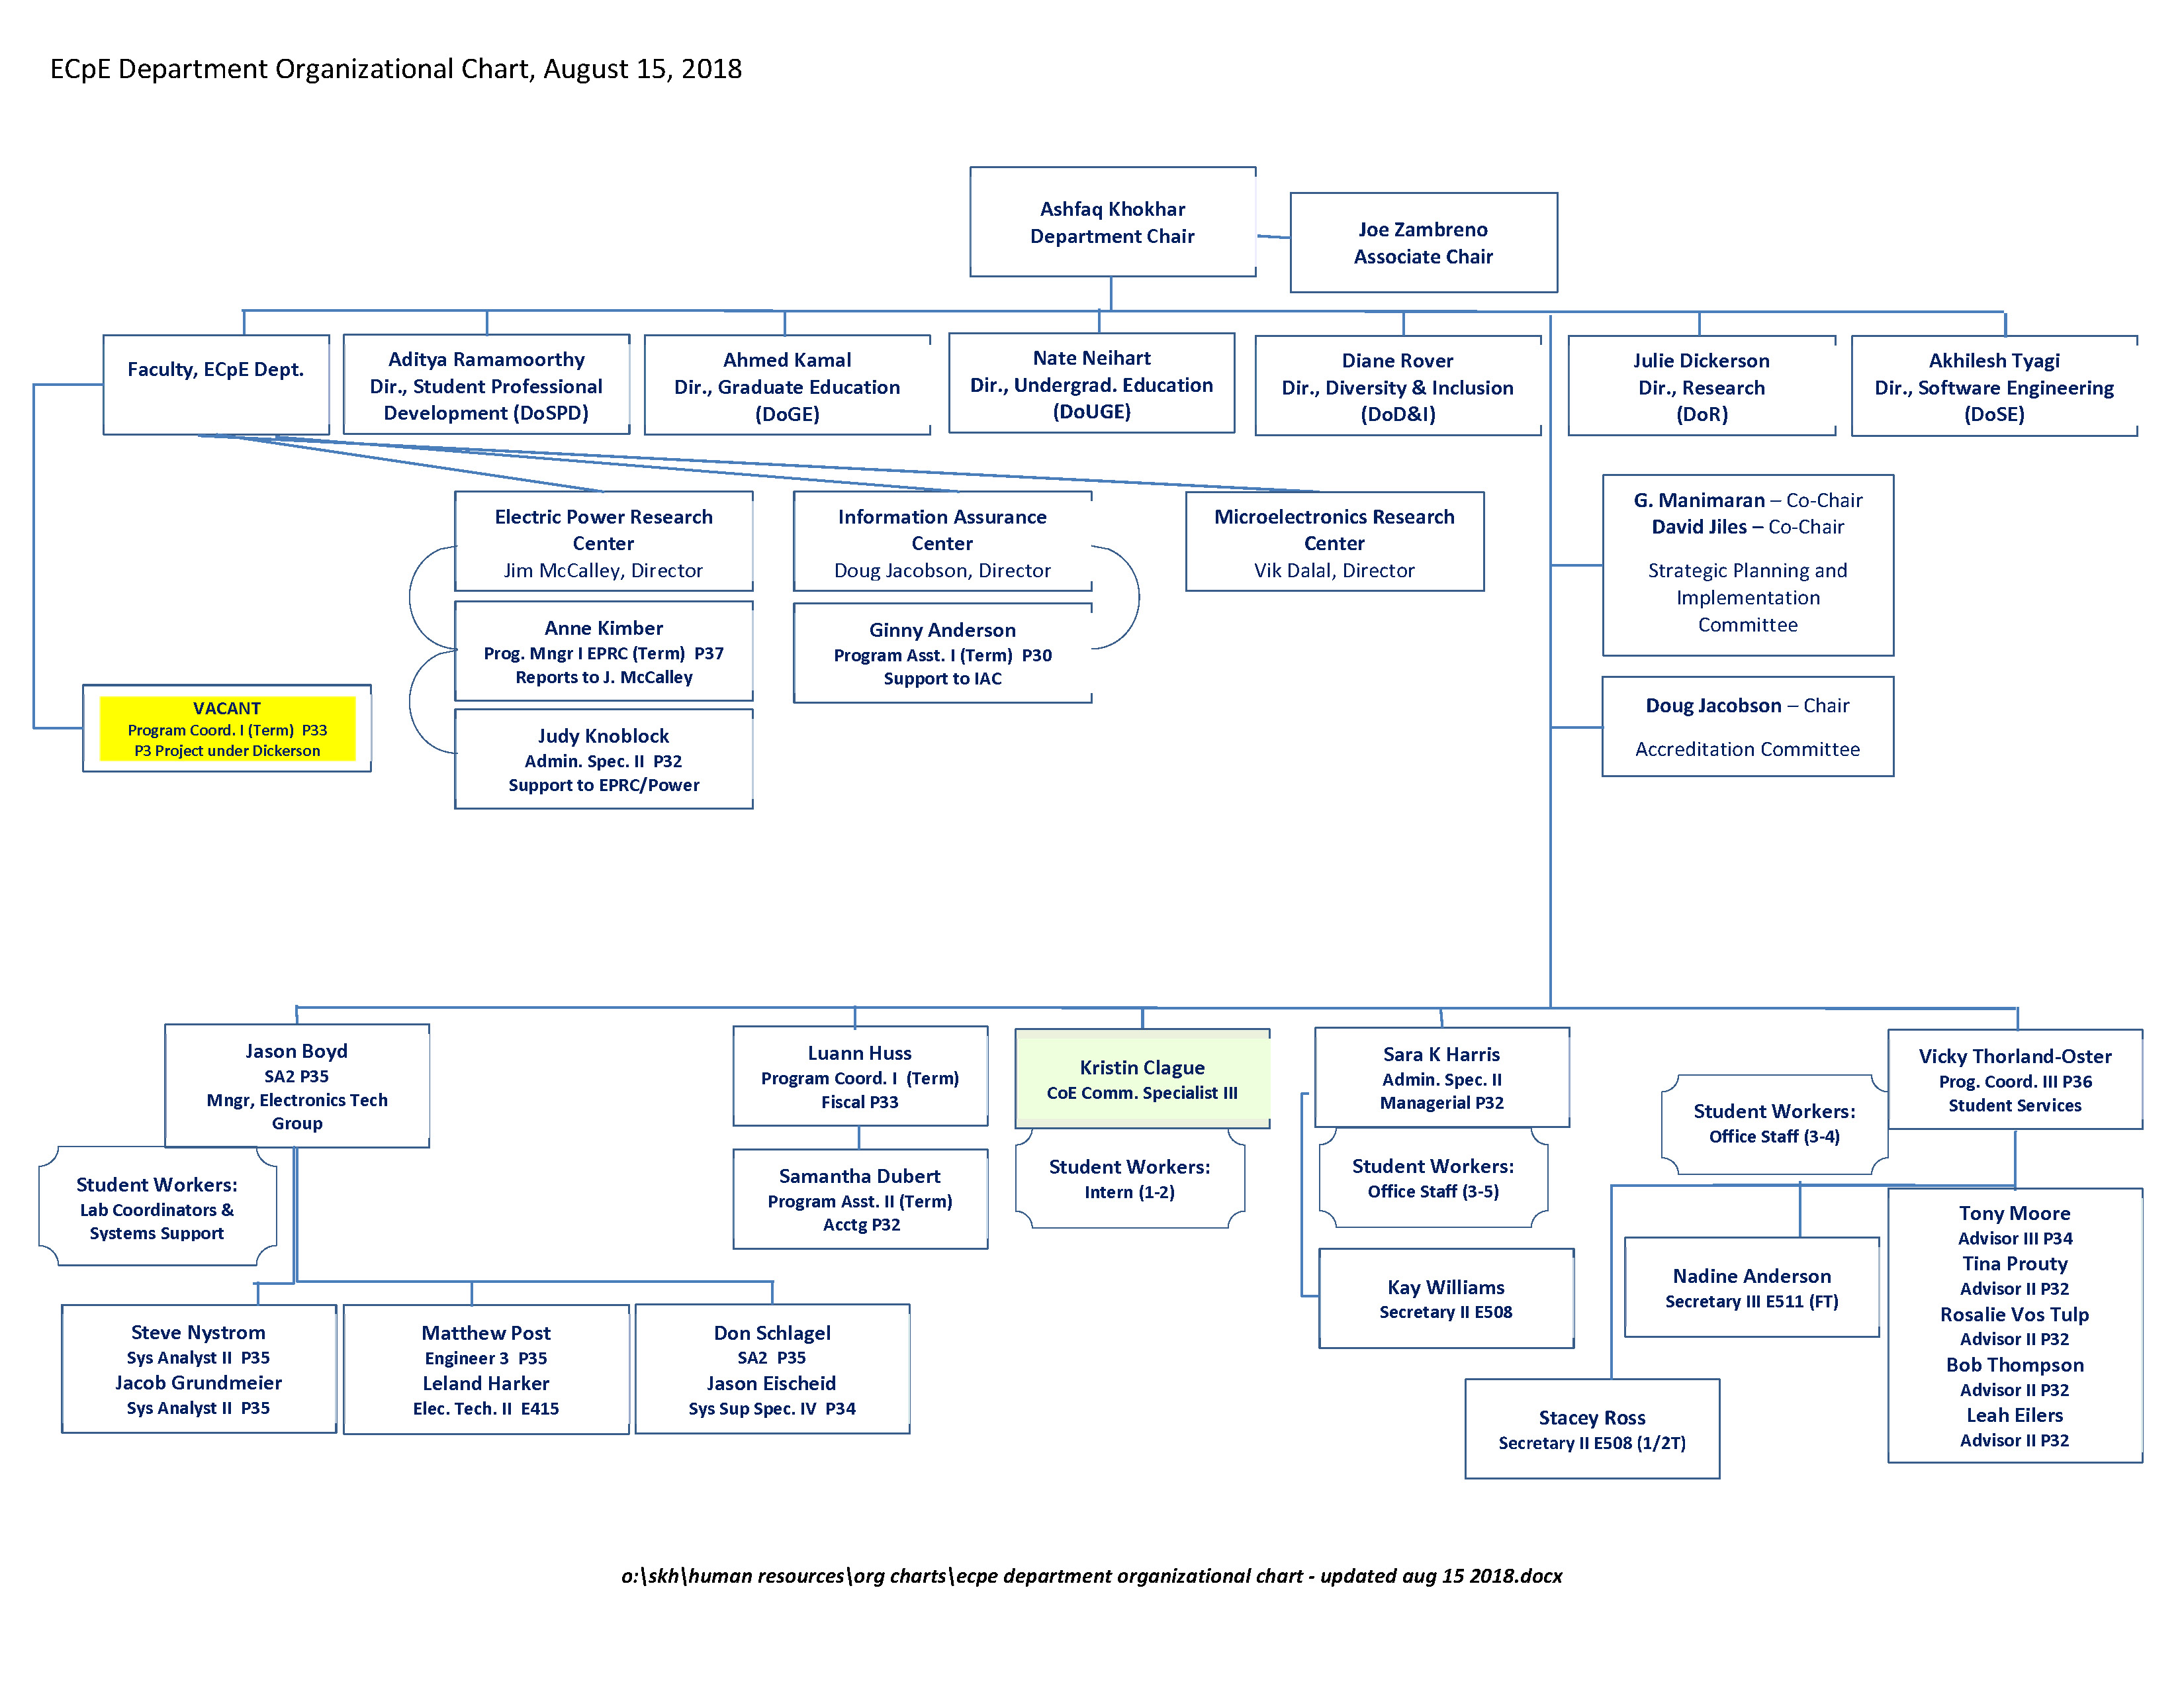 Dod Structure Chart